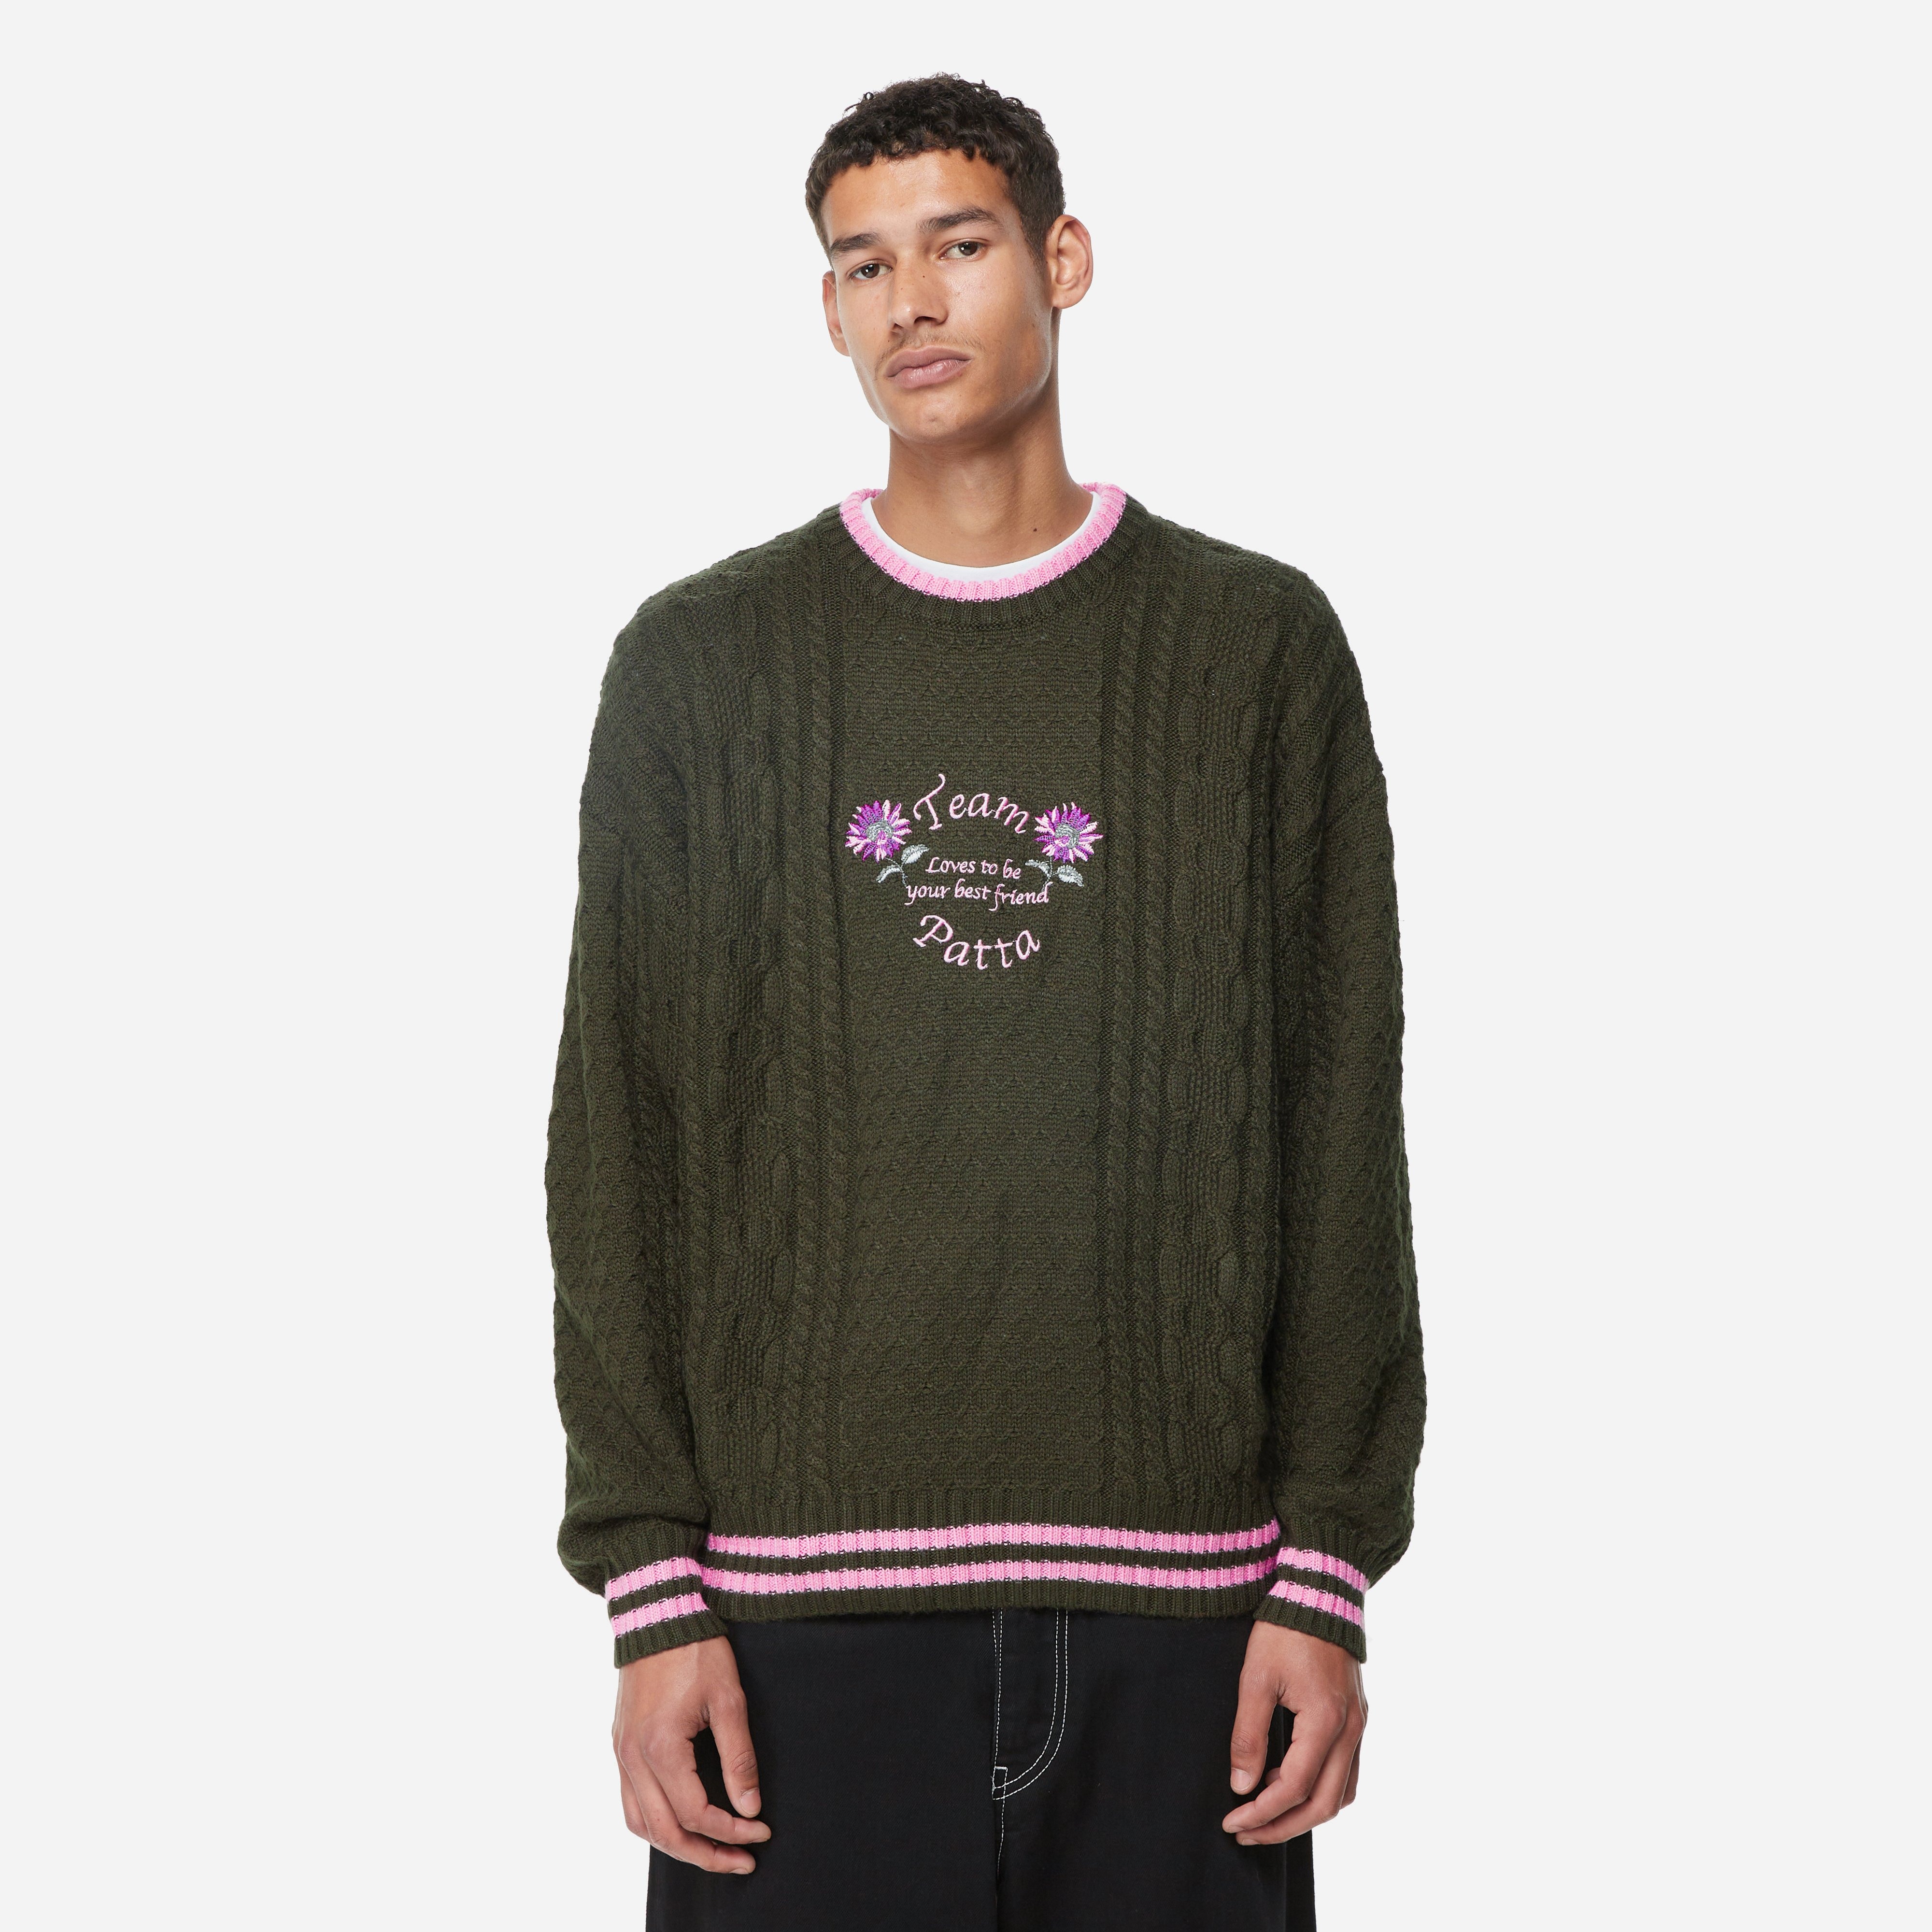 Green Patta Loves You Cable Knitted Sweater | HIP